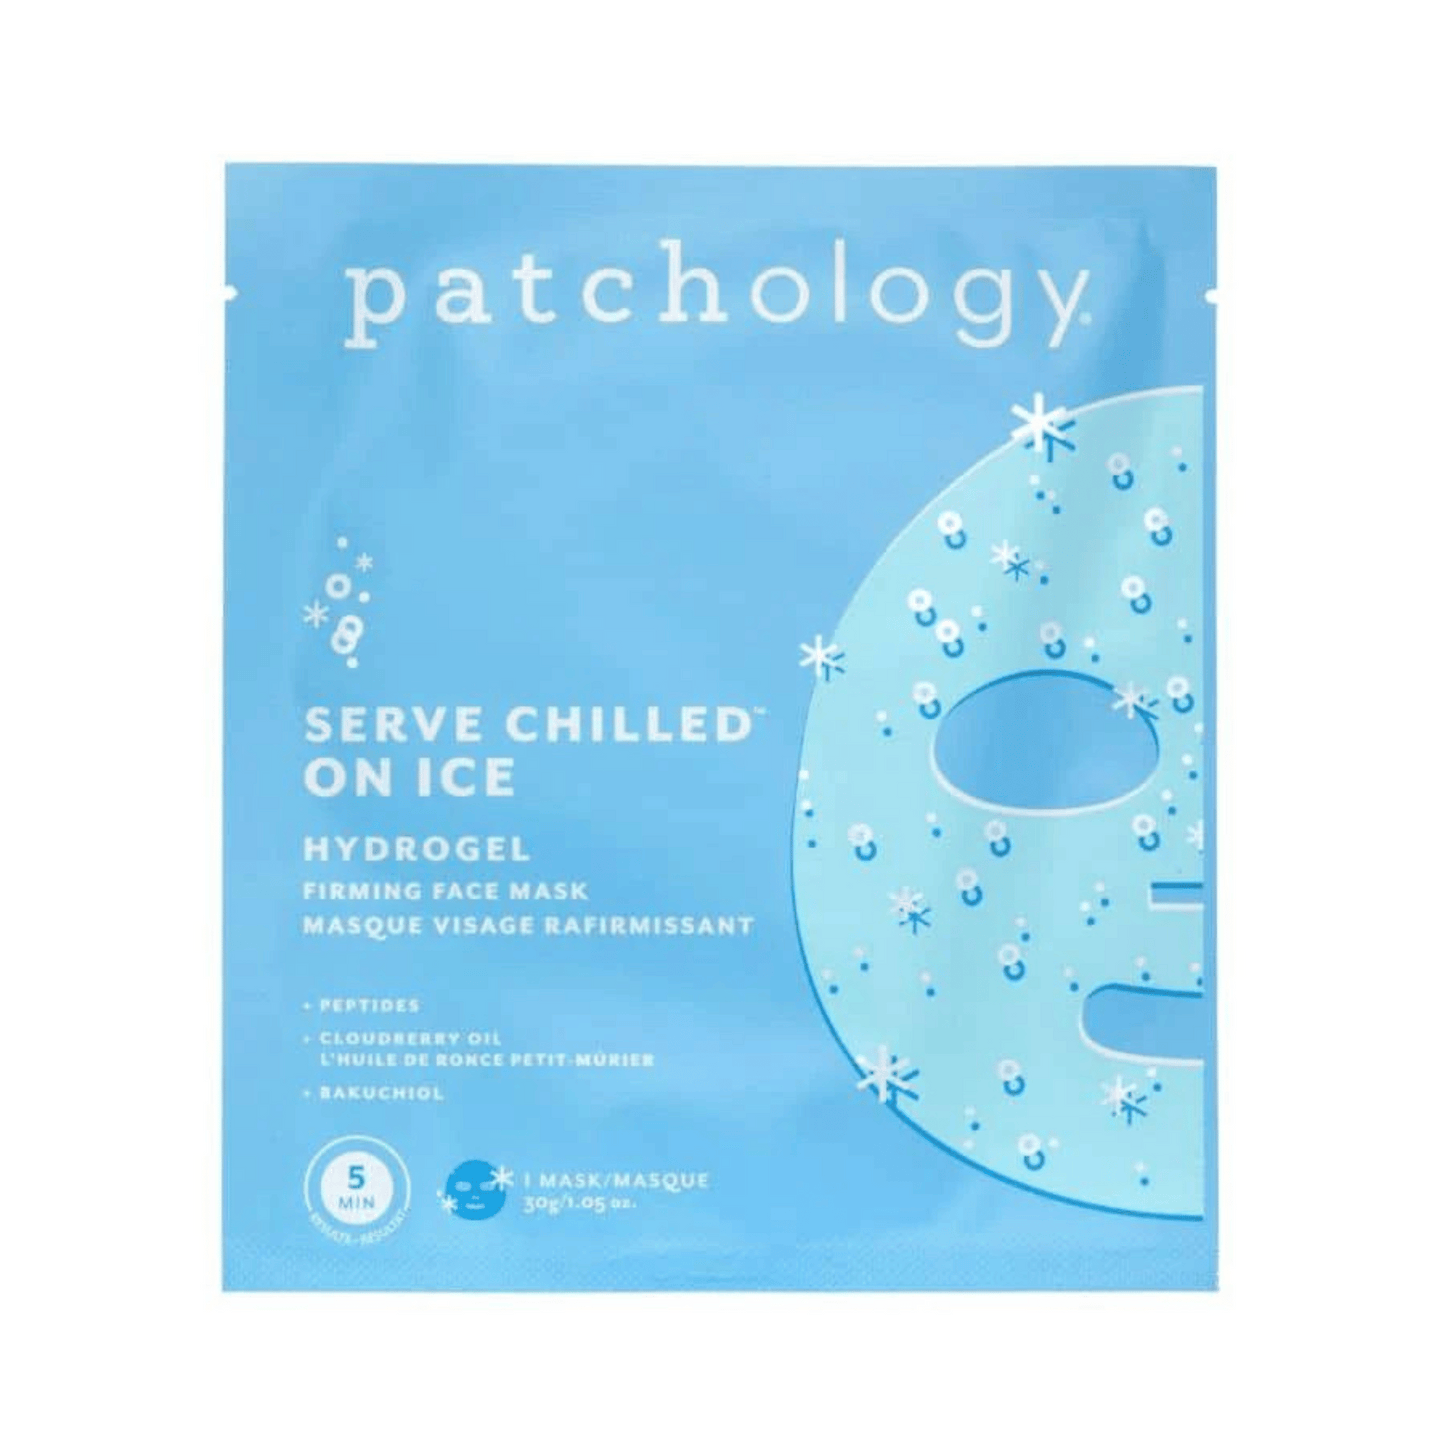 Primary Image of Serve Chilled on Ice Hydrogel Face Mask